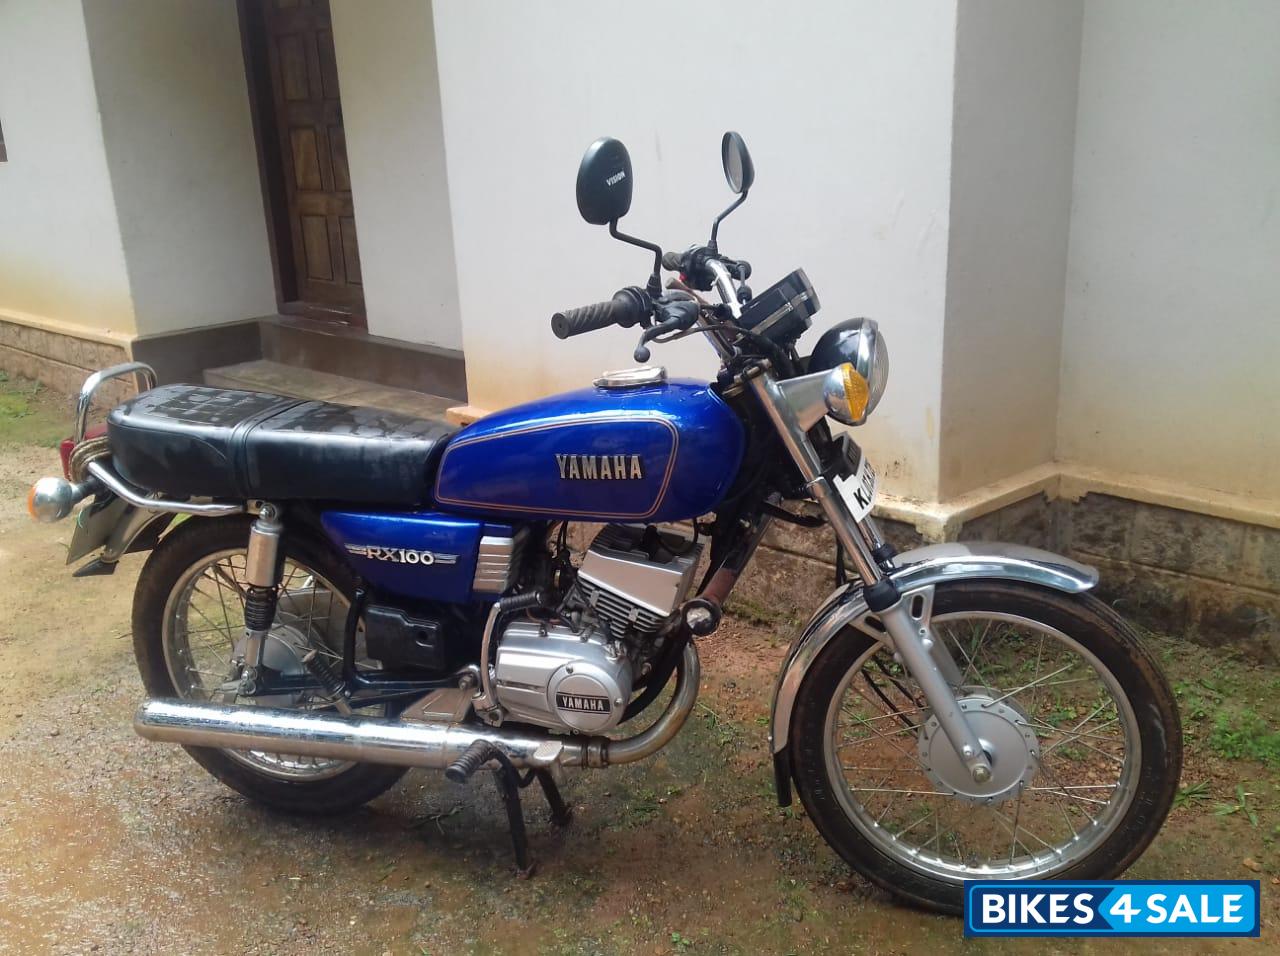 Used 1995 Model Yamaha Rx 100 For Sale In Kollam Id Bikes4sale